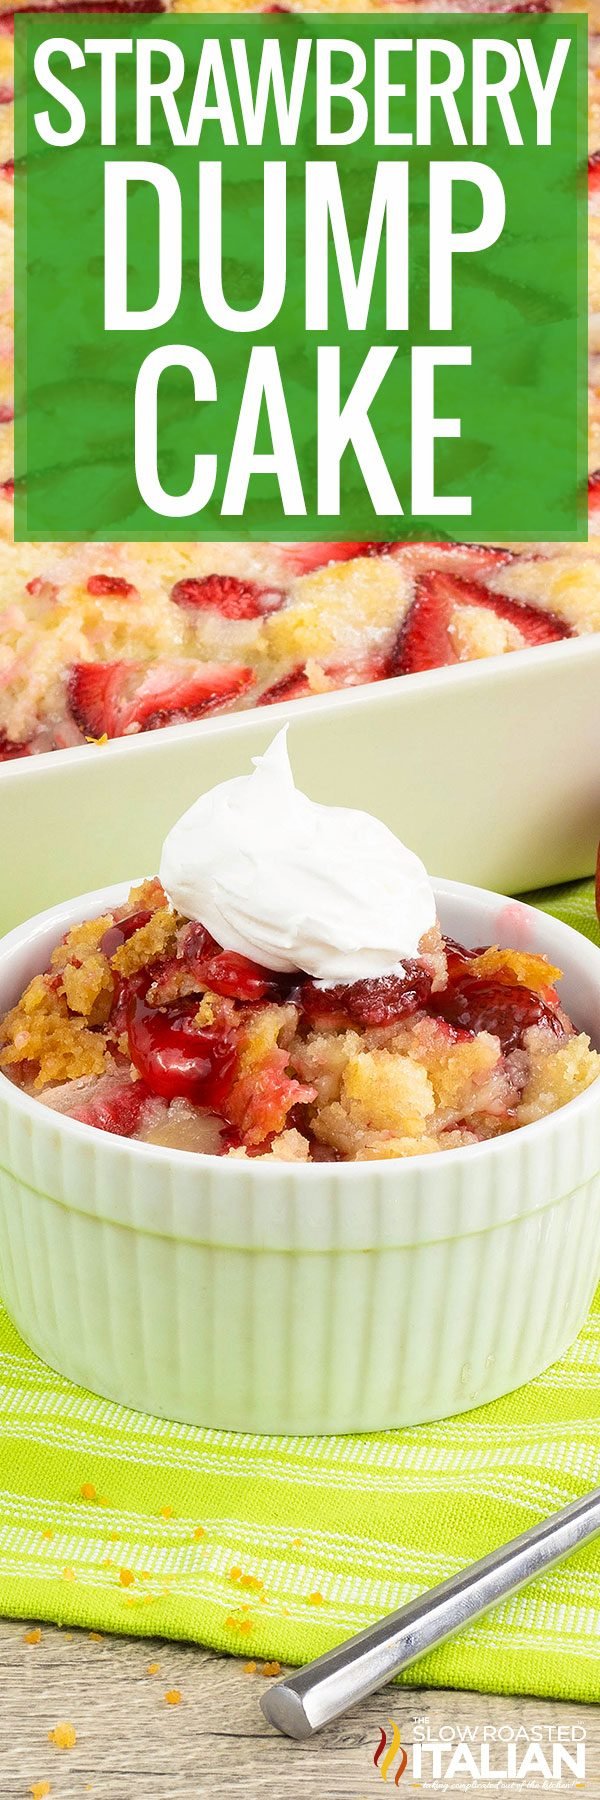 titled image (and shown): strawberry dump cake